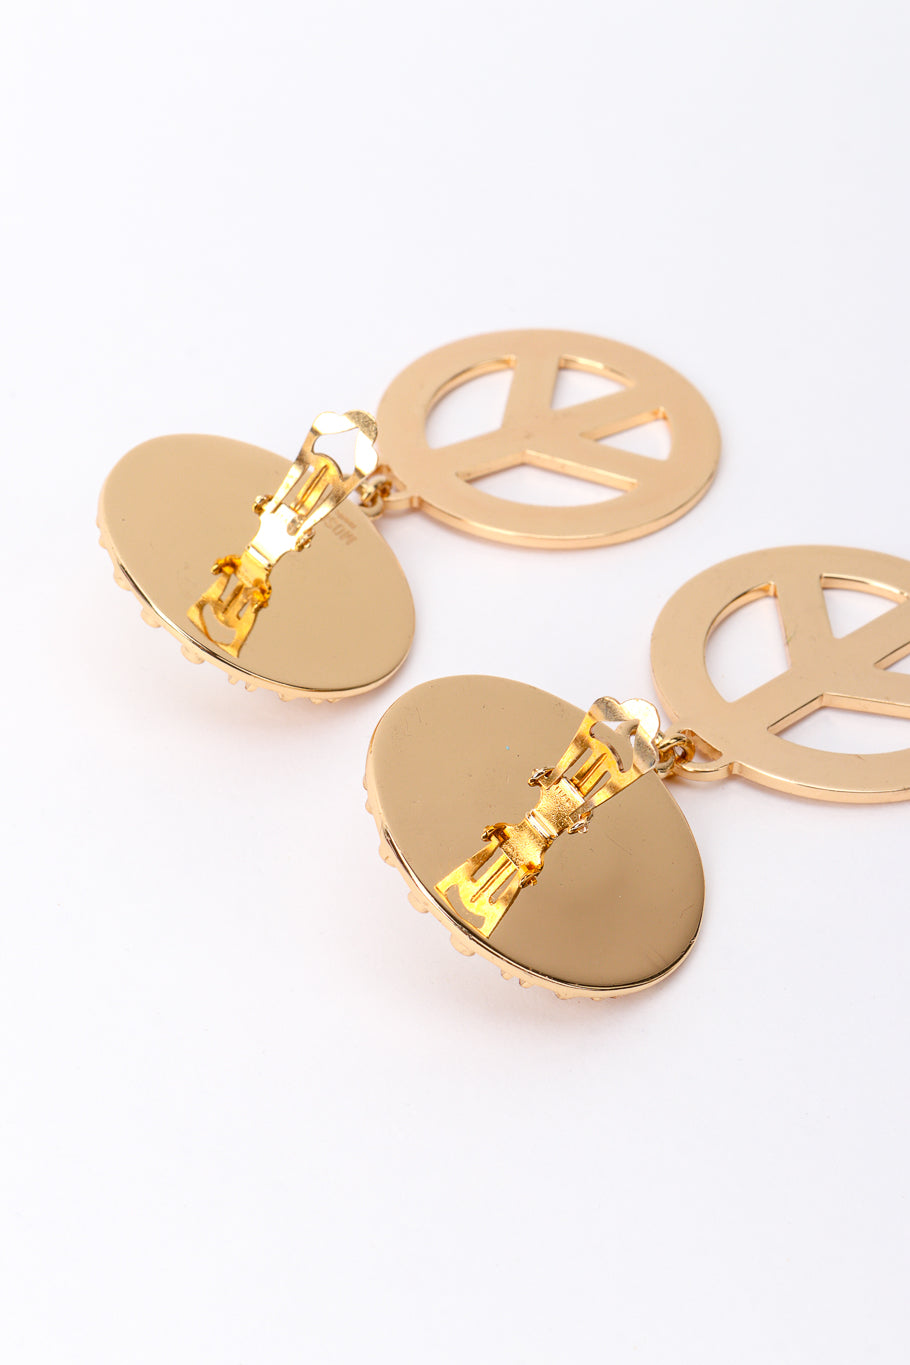 Vintage Moschino Bijoux Peace Drop Earrings back clips unhinged @recess la